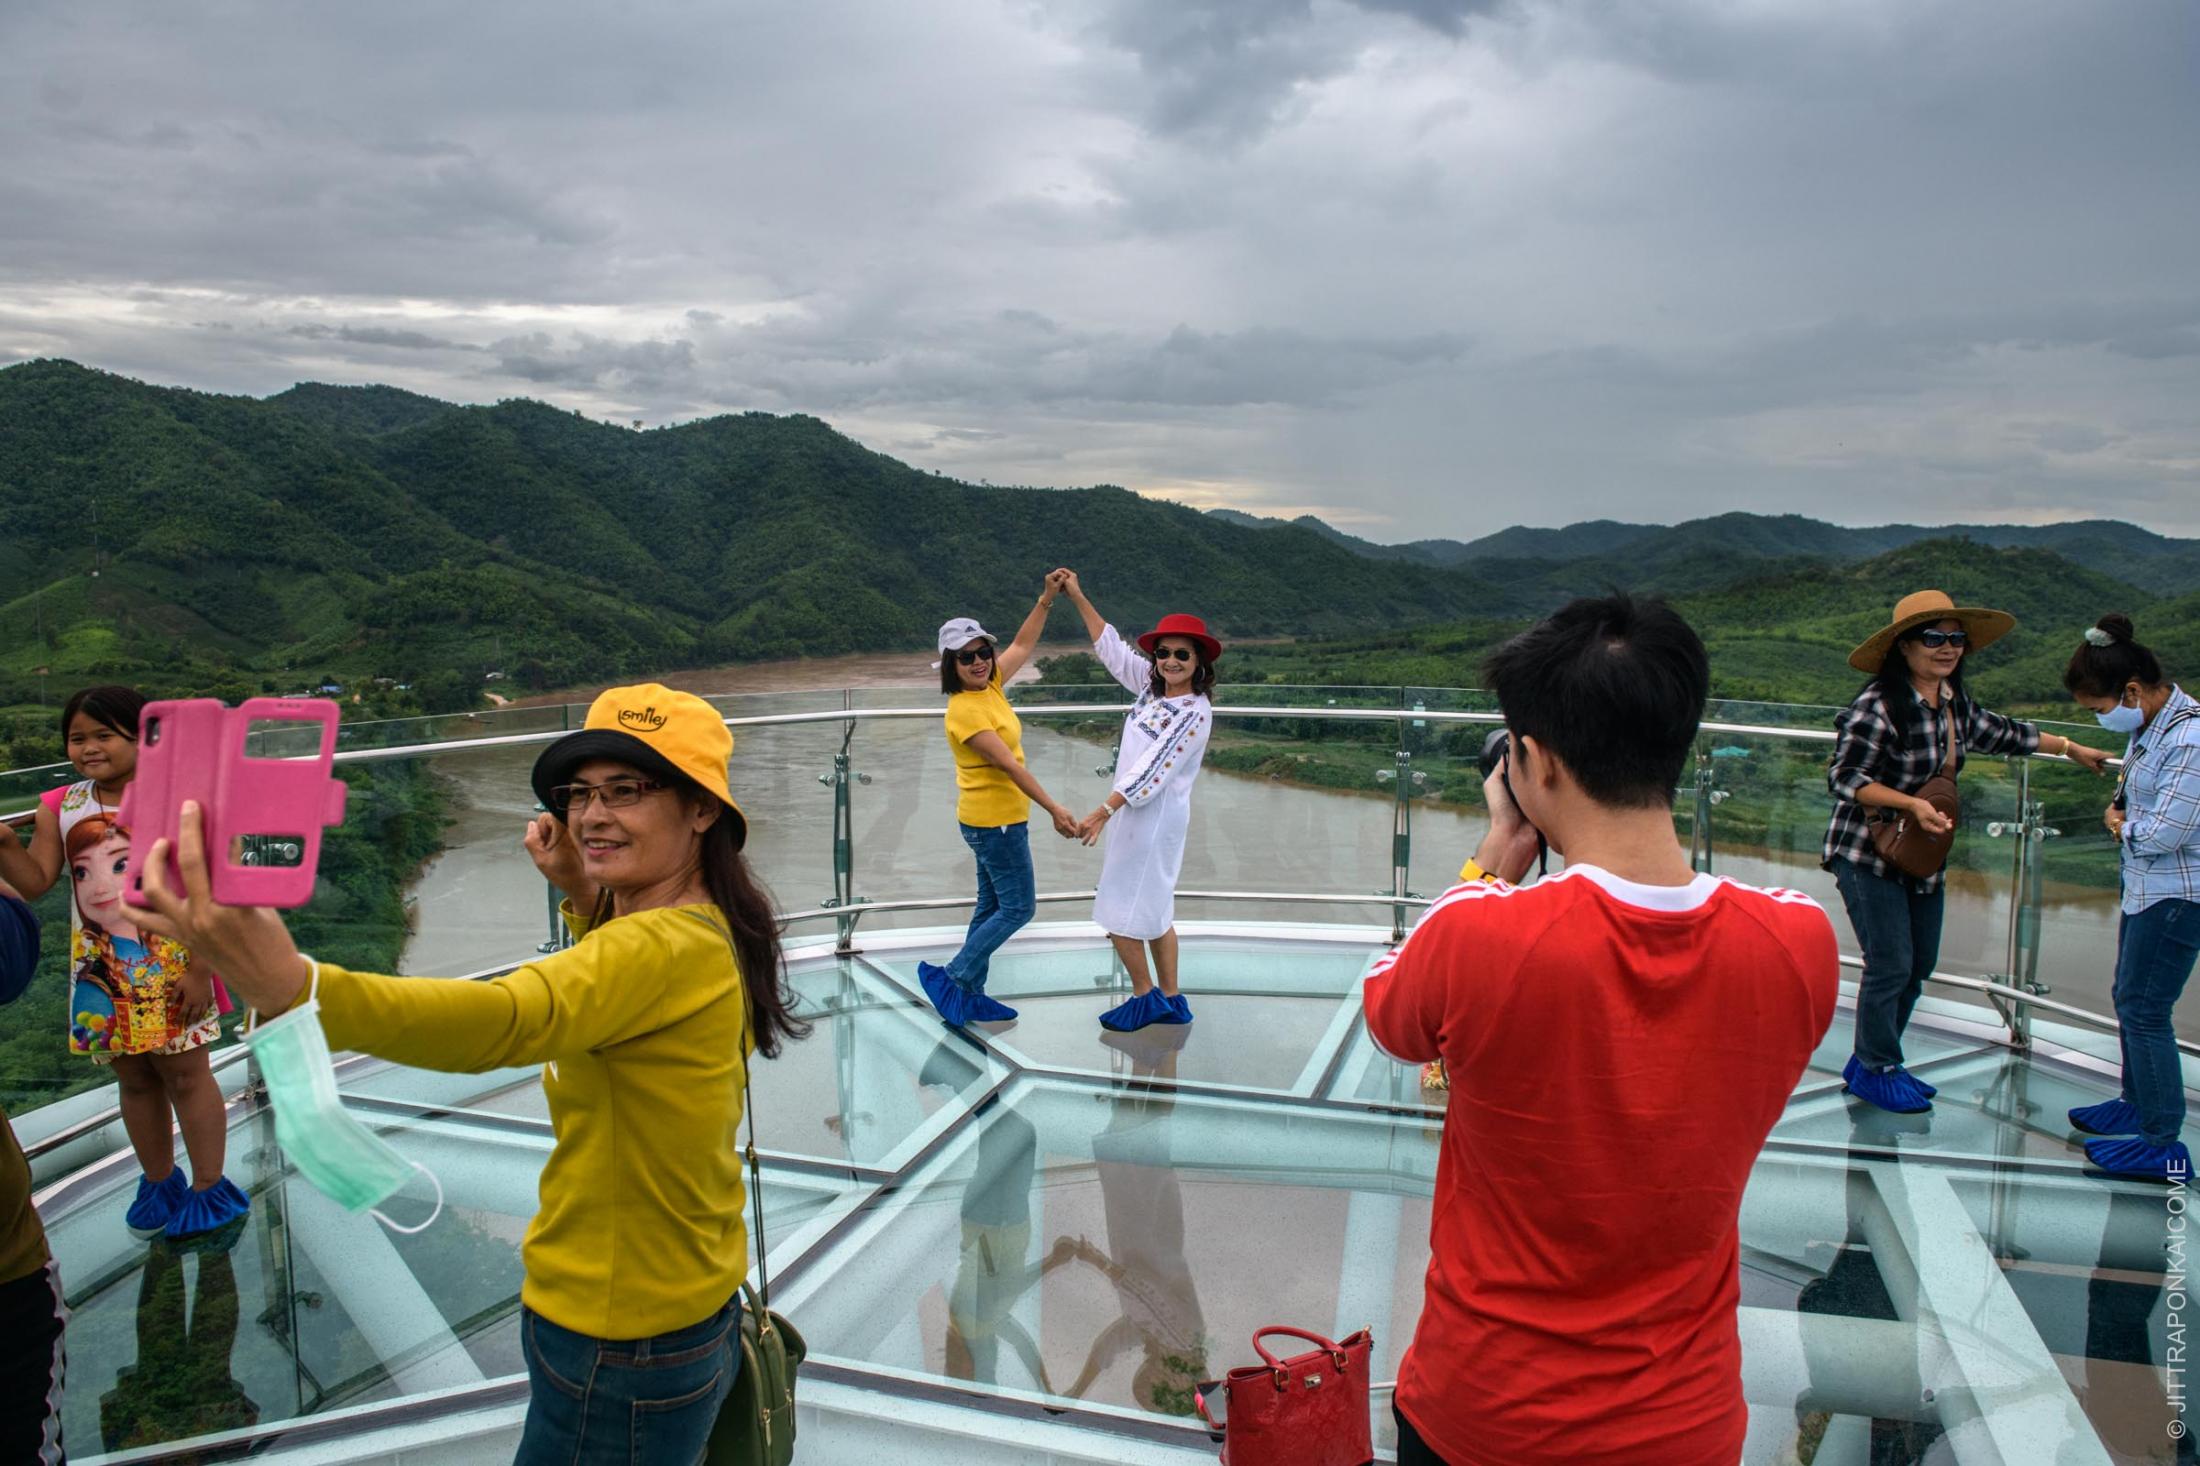 The new glass skywalk of Chiang Khan province is located at a joined border point between Thailand and Laos. This tourist attraction allows for beautiful views of the Mekong River running into Thailand from Laos. The Sanakham Dam site is planned only 2 km away from the border. In Loei, Thailand &ndash; August 2020.